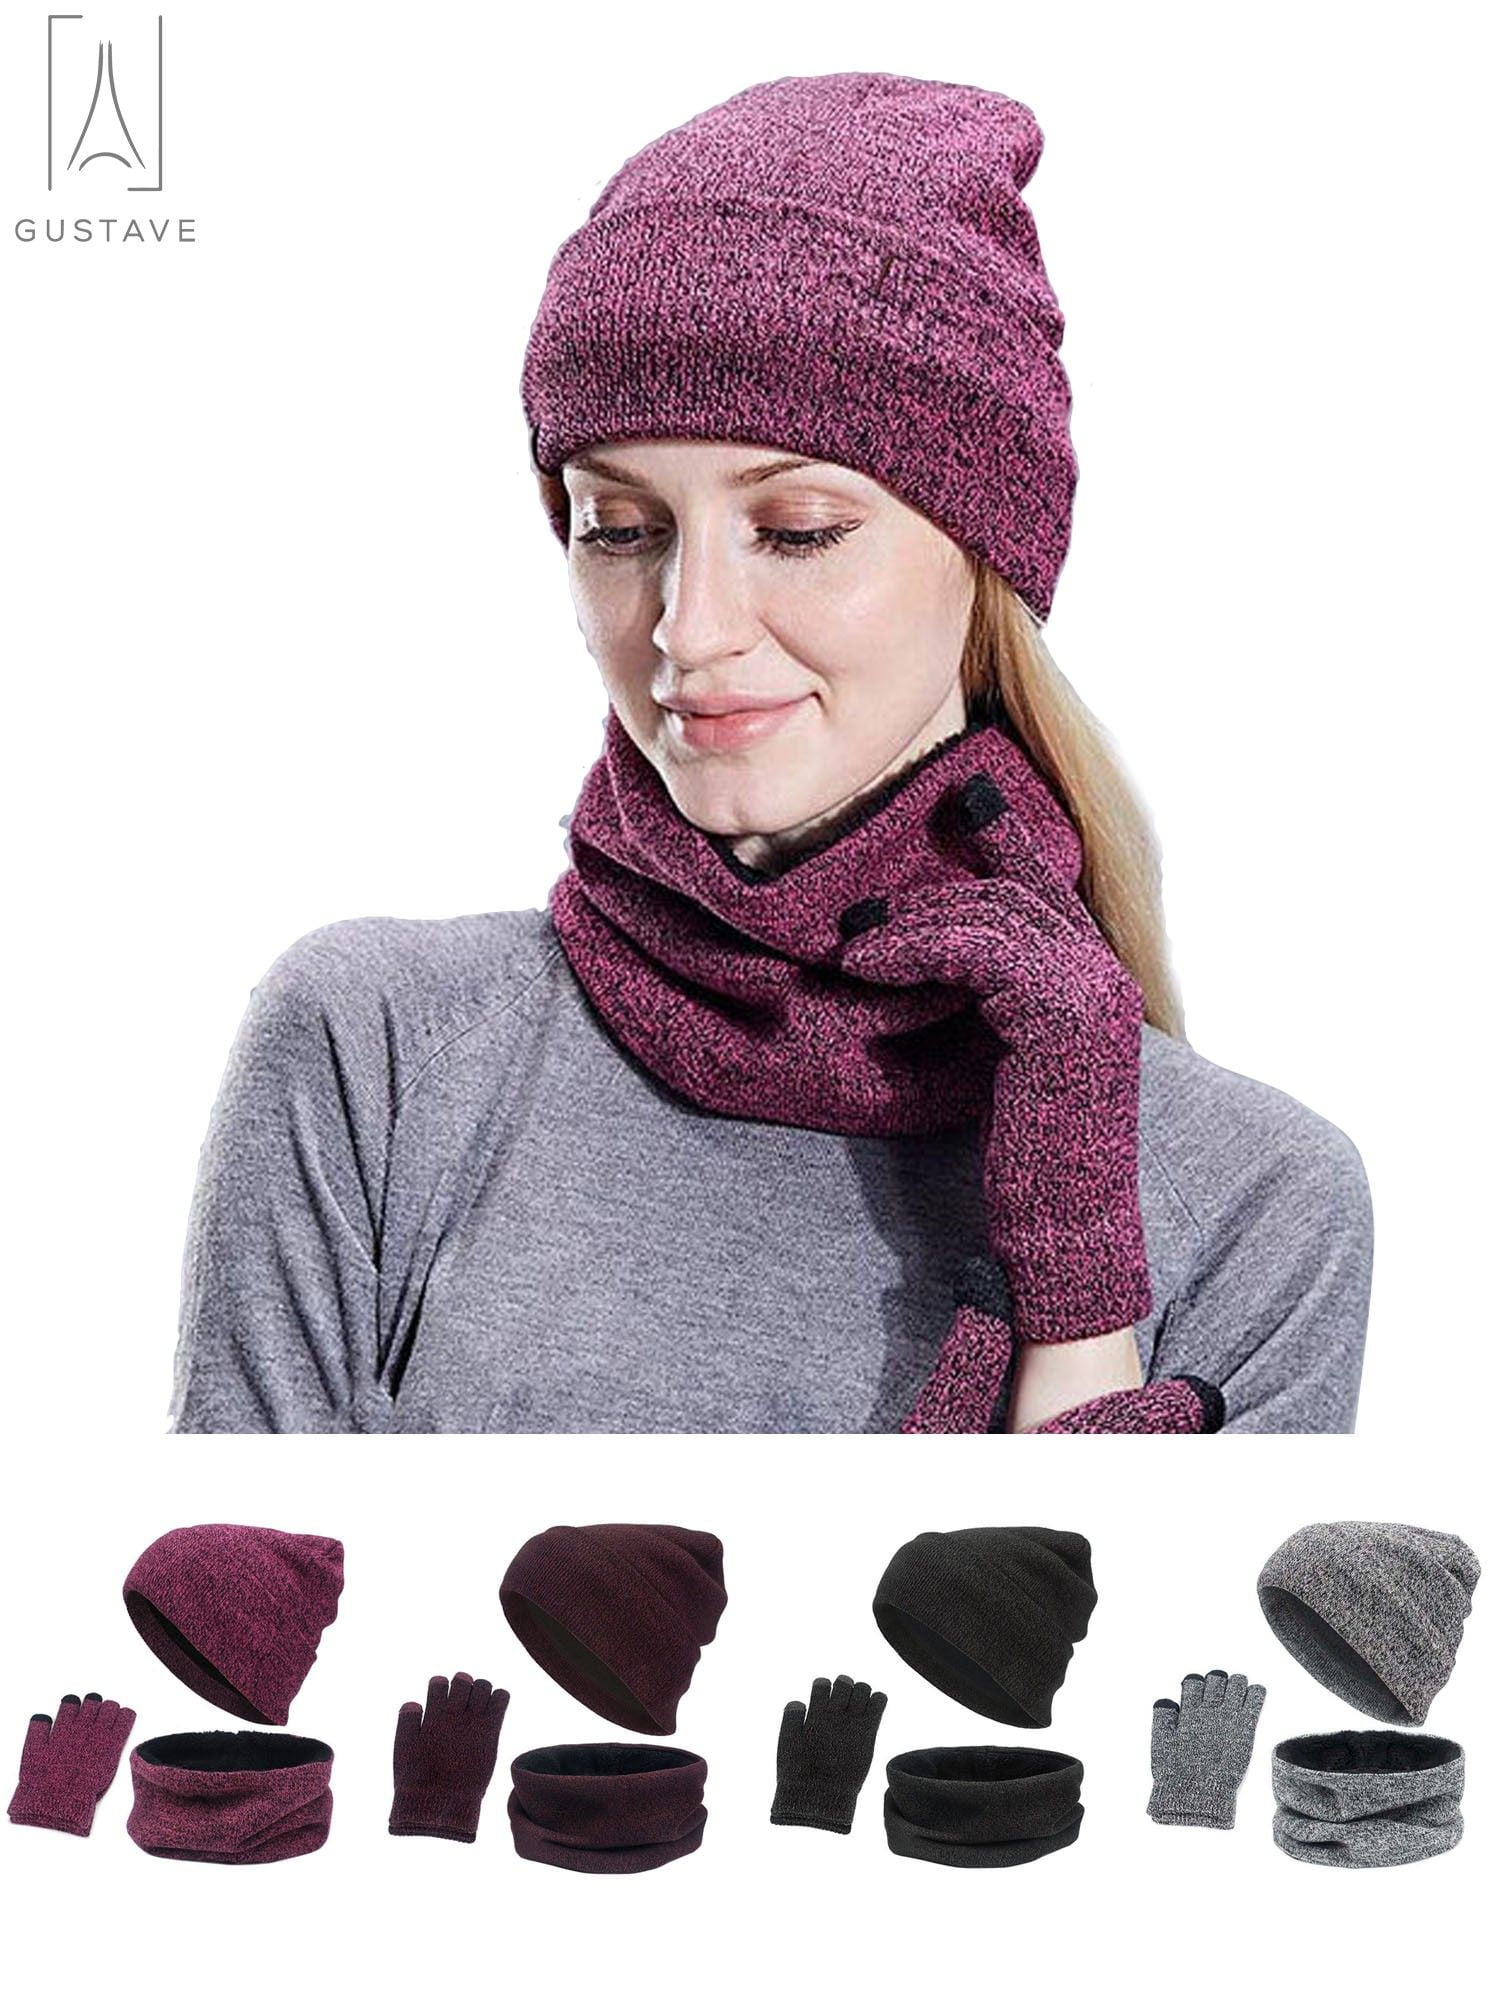 Gustave 3Pcs Winter Hat Scarf Gloves Set for Men and Women, Knit ...